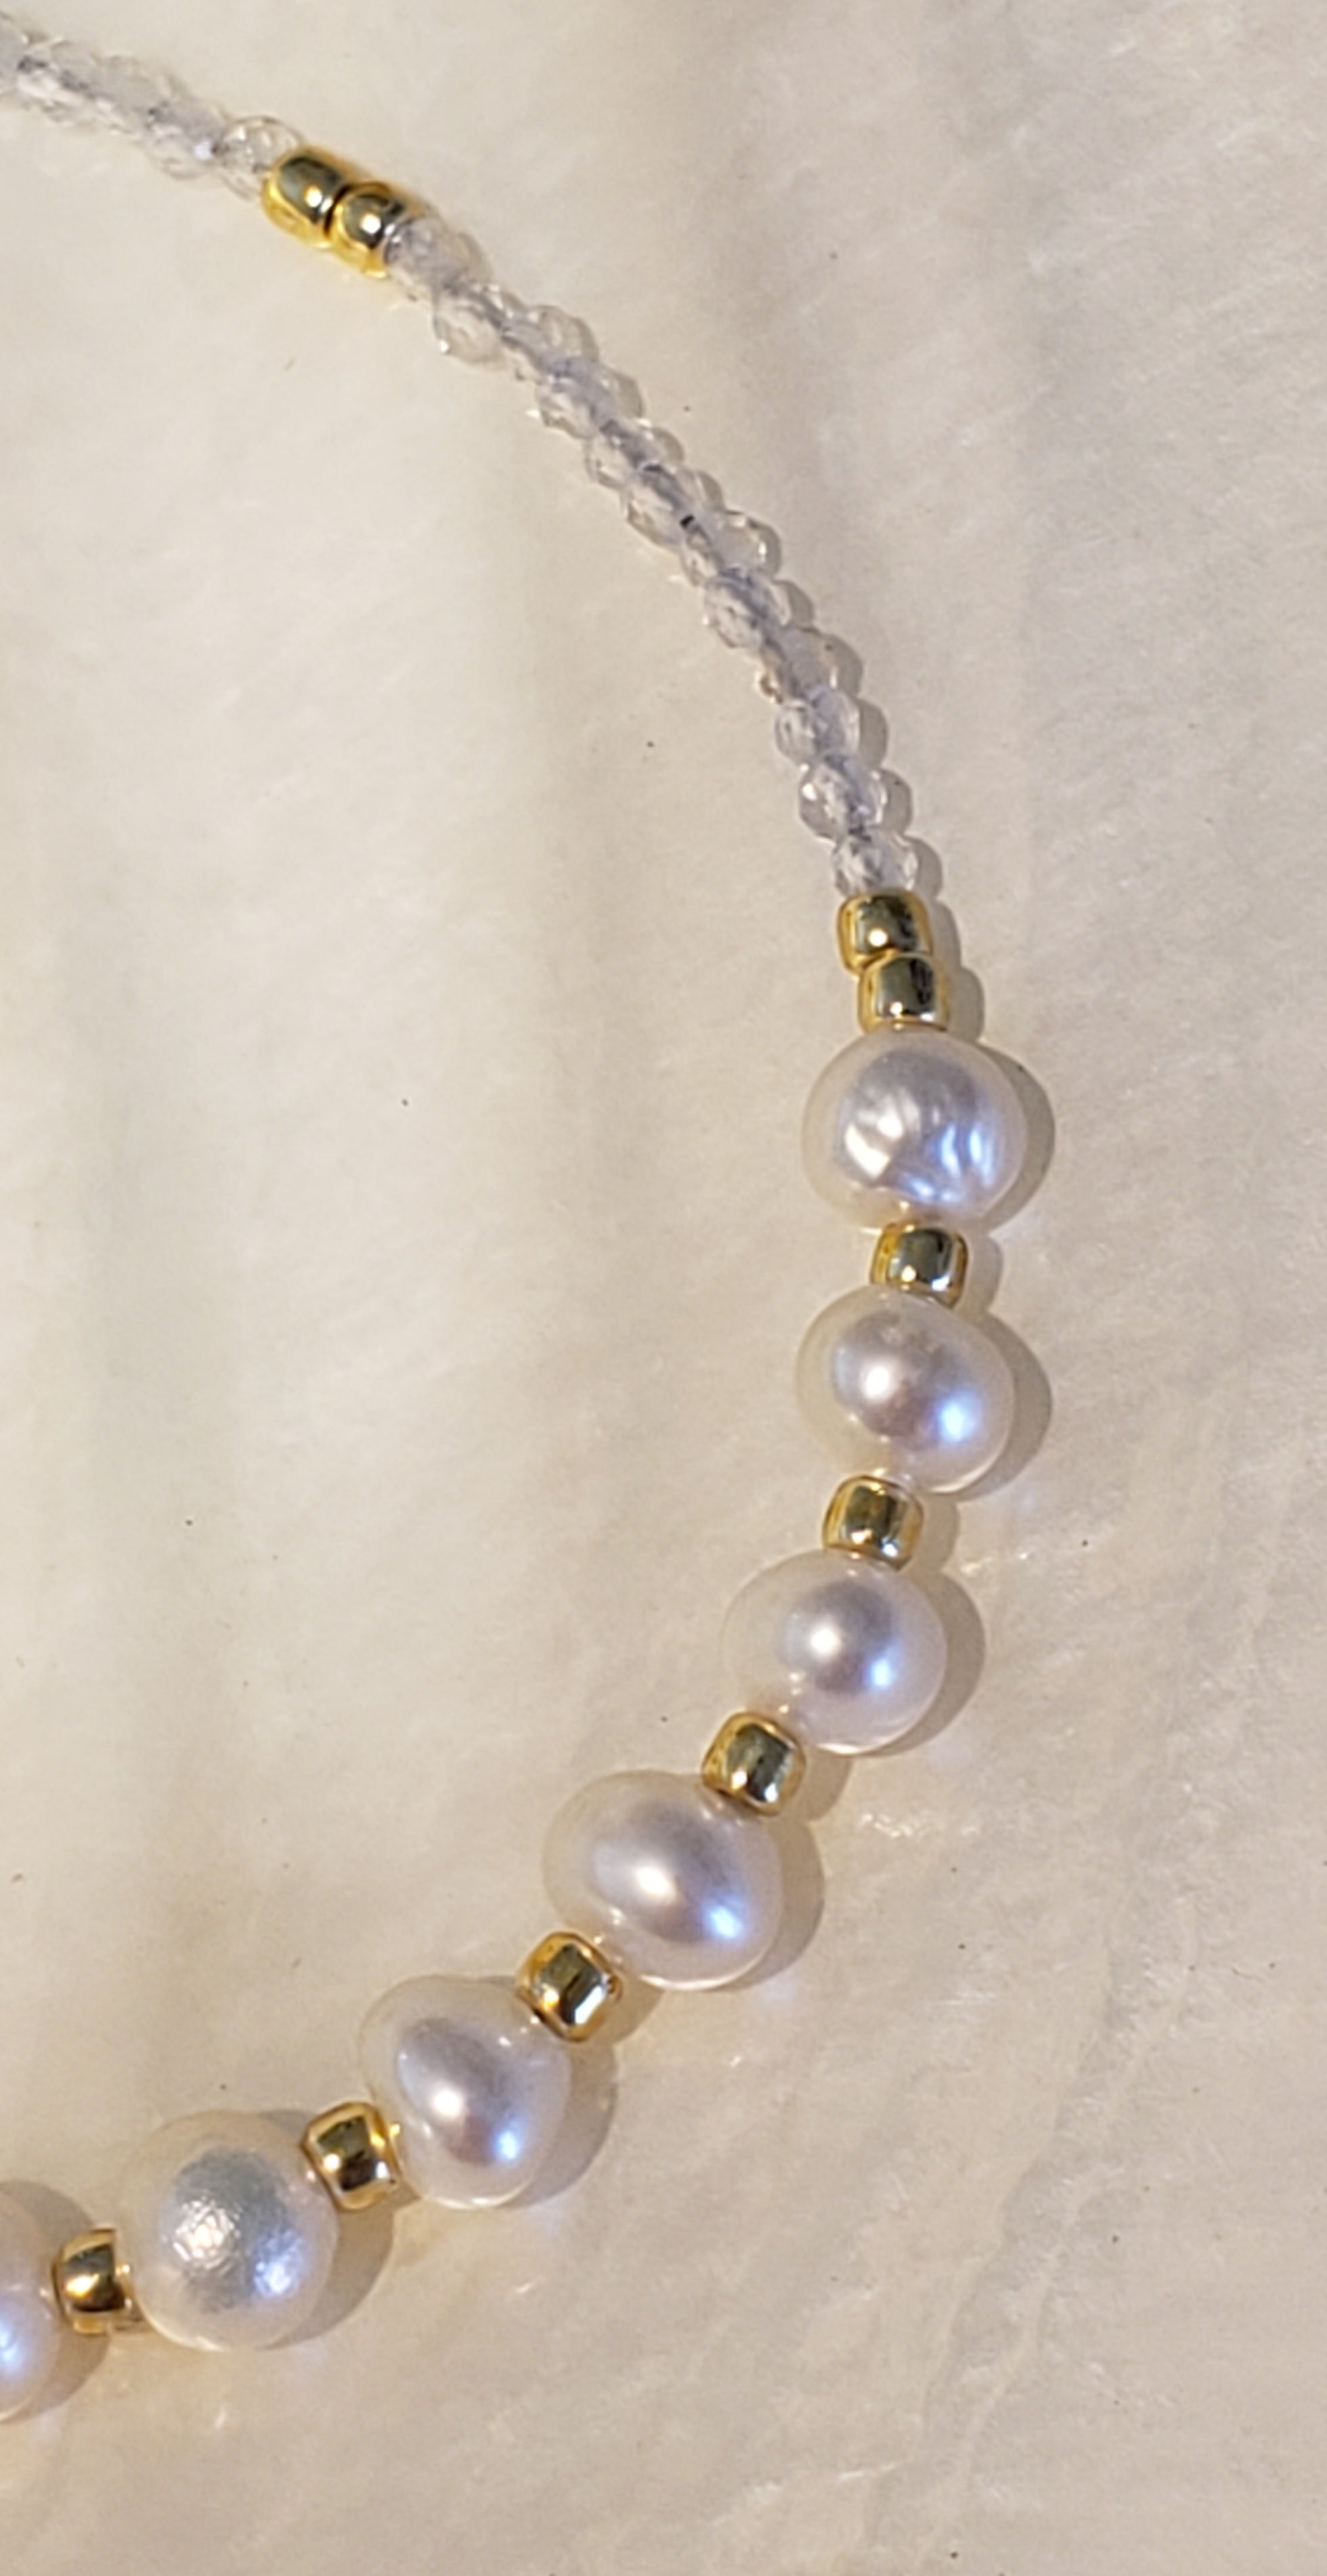 Bracelet Moonstone Gemstone and 7 Fresh Water Pearls Gold Filled